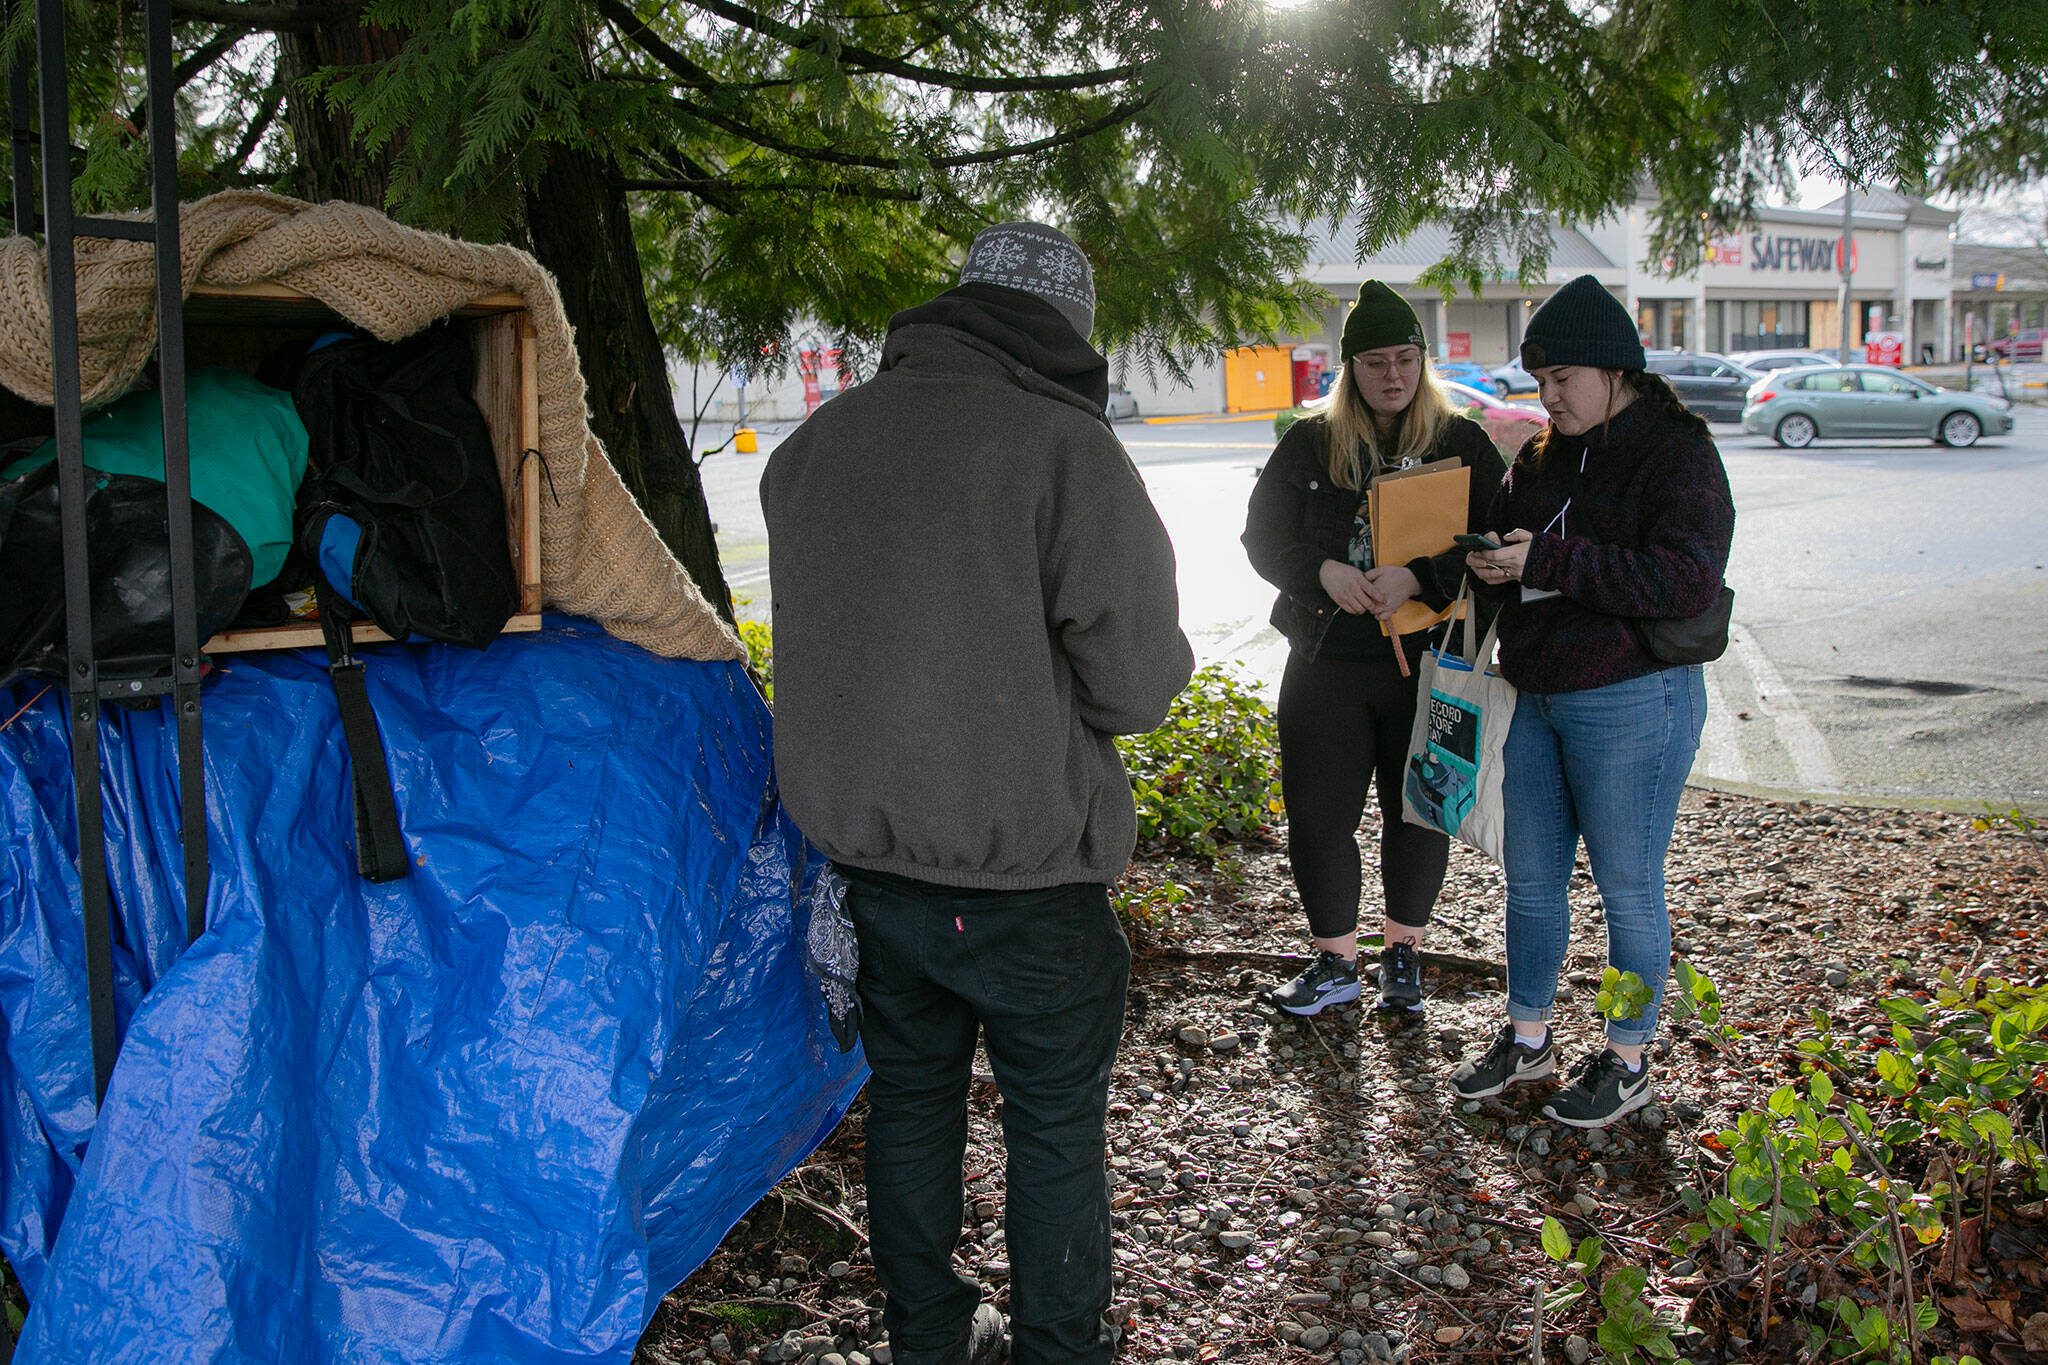 Liz Skinner (right) and Emma Titterness, both from Domestic Violence Services of Snohomish County, speak with a man near the Silver Lake Safeway while conducting a point-in-time count of those experiencing homelessness, Jan. 23, in Everett. Results of this year’s count are expected later in May. (Ryan Berry / The Herald file photo)